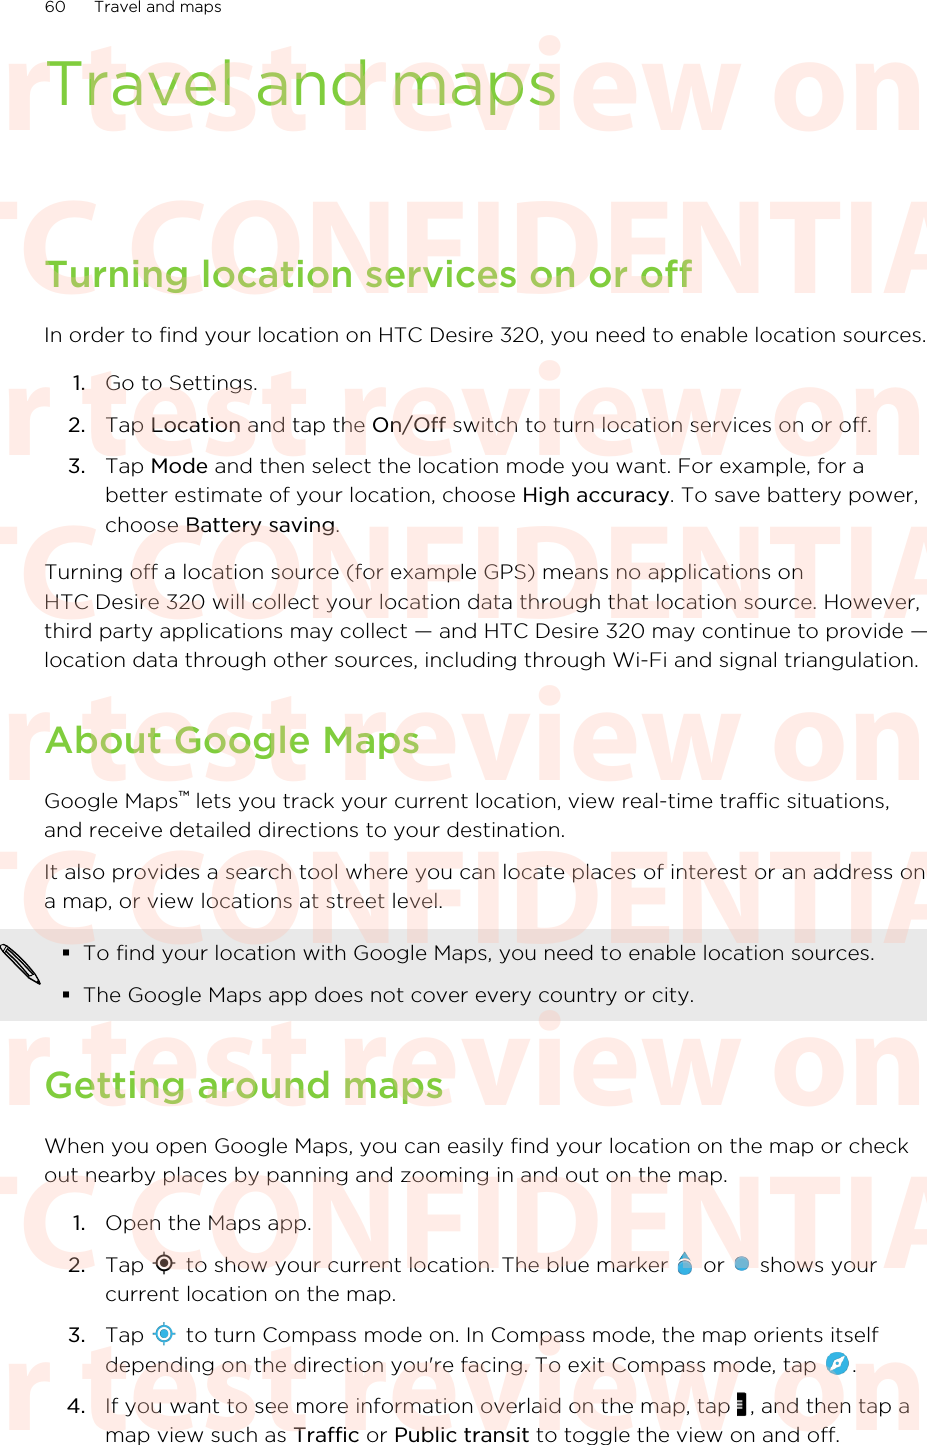 Travel and mapsTurning location services on or offIn order to find your location on HTC Desire 320, you need to enable location sources.1. Go to Settings.2. Tap Location and tap the On/Off switch to turn location services on or off.3. Tap Mode and then select the location mode you want. For example, for abetter estimate of your location, choose High accuracy. To save battery power,choose Battery saving.Turning off a location source (for example GPS) means no applications onHTC Desire 320 will collect your location data through that location source. However,third party applications may collect — and HTC Desire 320 may continue to provide —location data through other sources, including through Wi-Fi and signal triangulation.About Google MapsGoogle Maps™ lets you track your current location, view real-time traffic situations,and receive detailed directions to your destination.It also provides a search tool where you can locate places of interest or an address ona map, or view locations at street level.§To find your location with Google Maps, you need to enable location sources.§The Google Maps app does not cover every country or city.Getting around mapsWhen you open Google Maps, you can easily find your location on the map or checkout nearby places by panning and zooming in and out on the map.1. Open the Maps app.2. Tap   to show your current location. The blue marker   or   shows yourcurrent location on the map.3. Tap   to turn Compass mode on. In Compass mode, the map orients itselfdepending on the direction you&apos;re facing. To exit Compass mode, tap  .4. If you want to see more information overlaid on the map, tap  , and then tap amap view such as Traffic or Public transit to toggle the view on and off.60 Travel and mapsHTC CONFIDENTIAL For test review only HTC CONFIDENTIAL For test review only HTC CONFIDENTIAL For test review only HTC CONFIDENTIAL For test review only HTC CONFIDENTIAL For test review only HTC CONFIDENTIAL For test review only